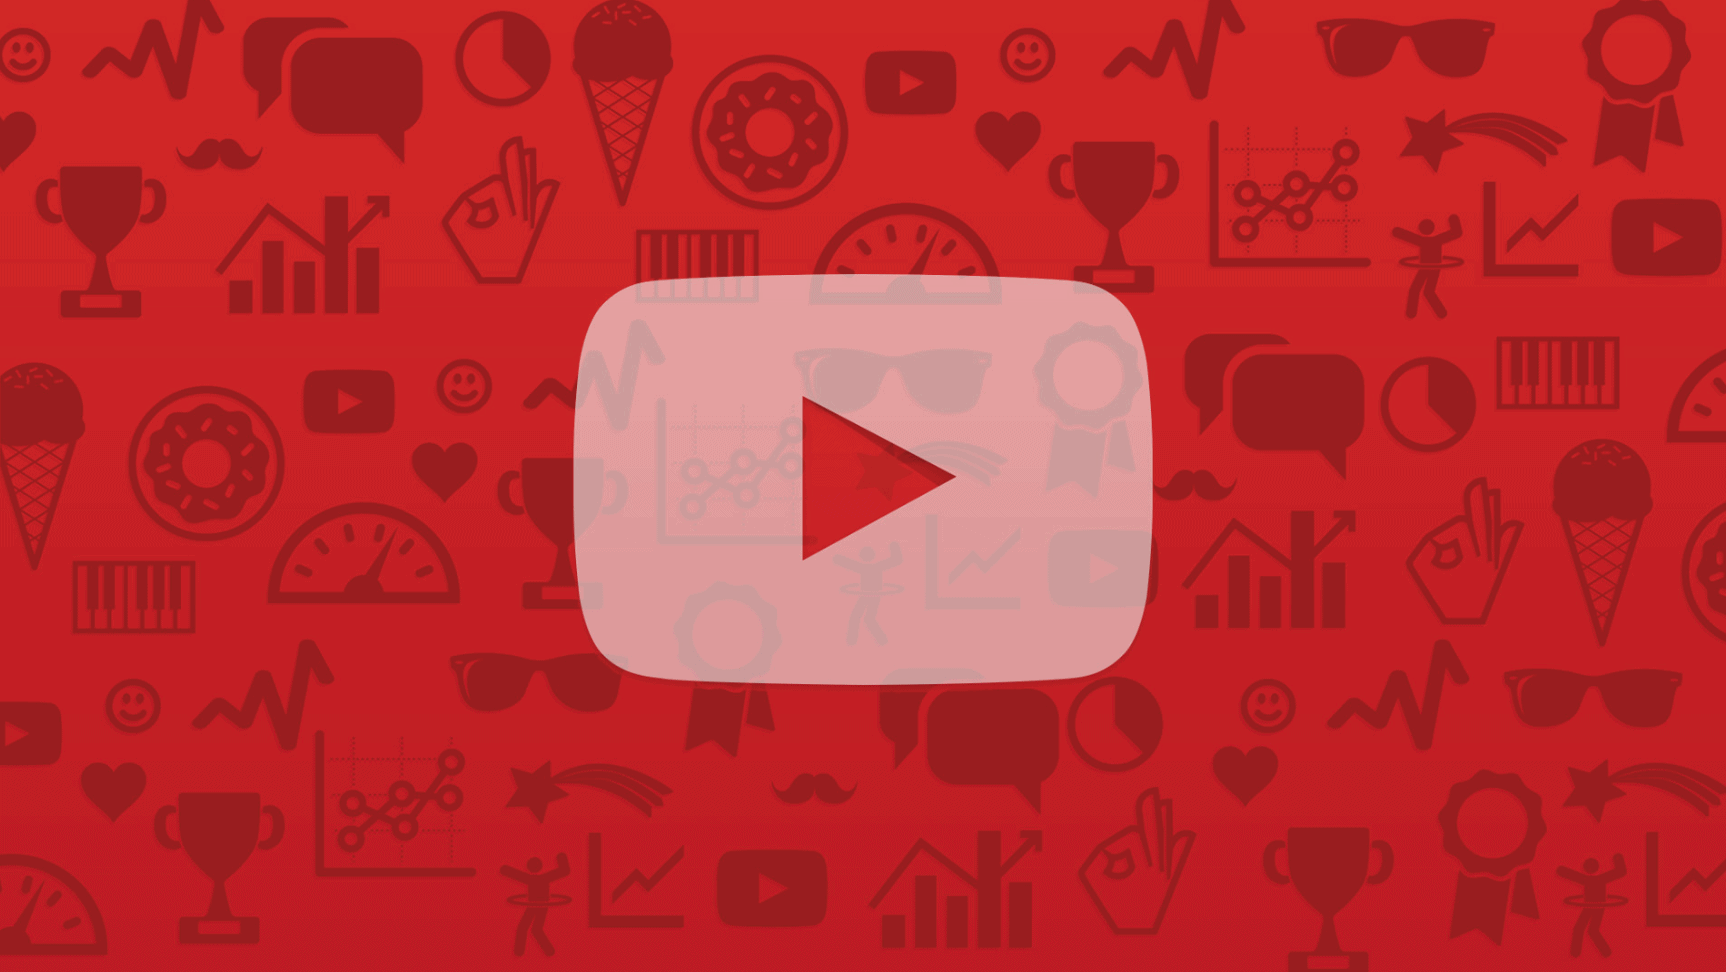 youtube button with background icons